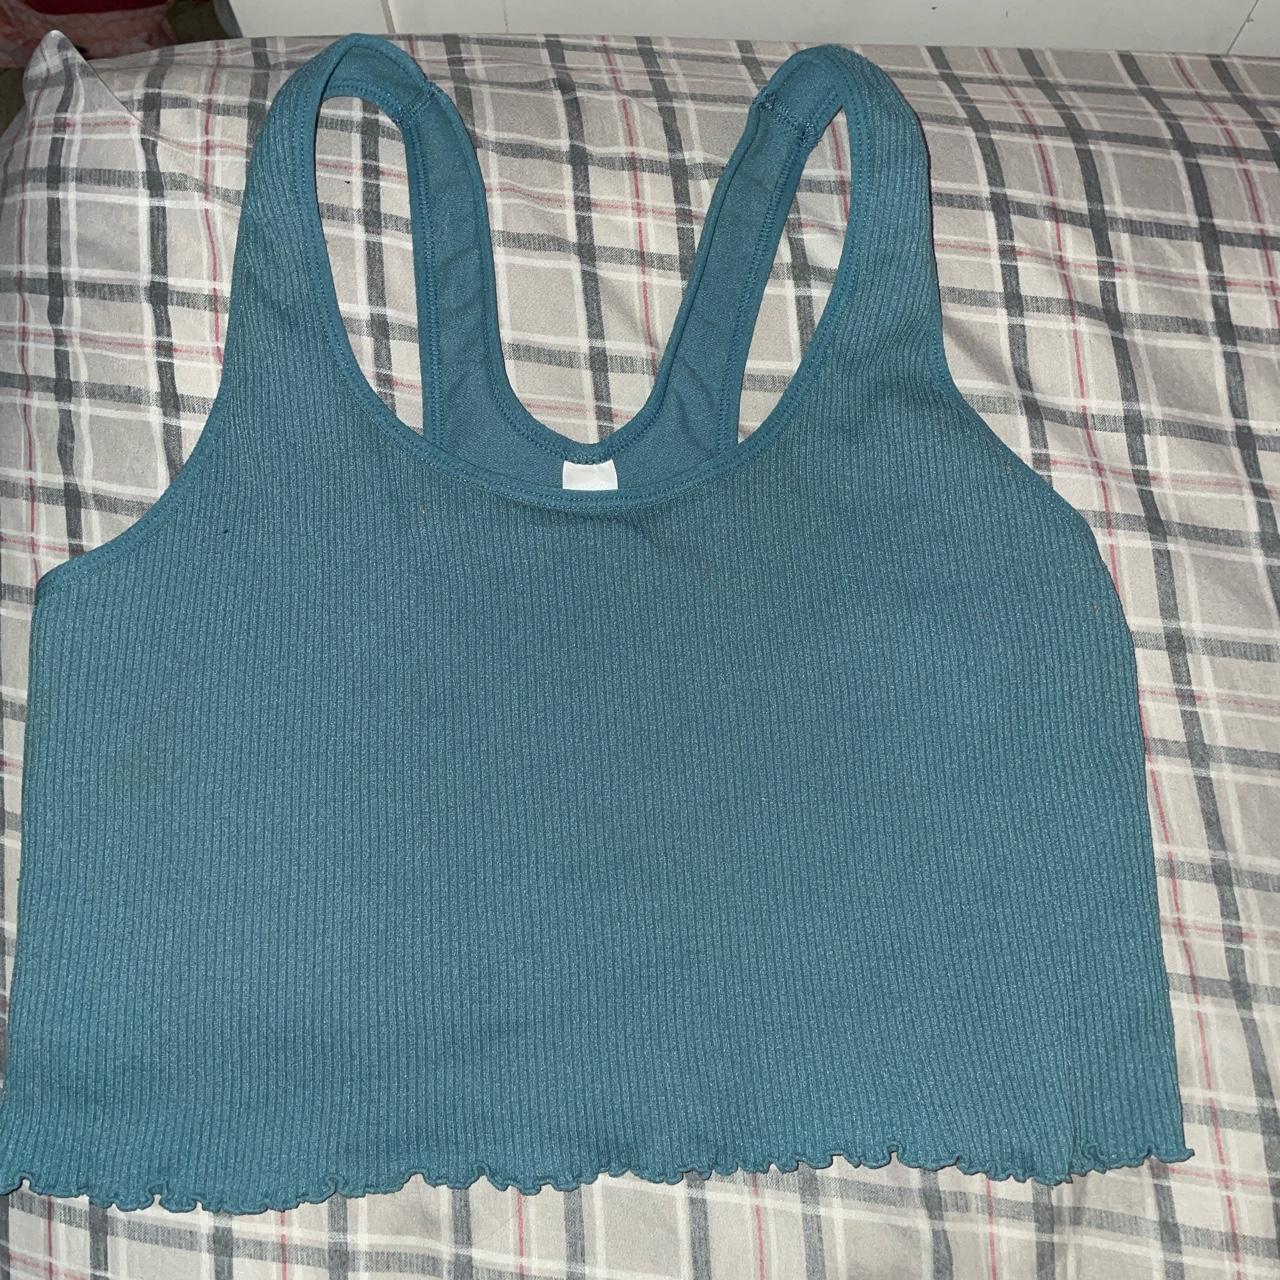 yogalicious cropped tank with built in bra fits XL - Depop